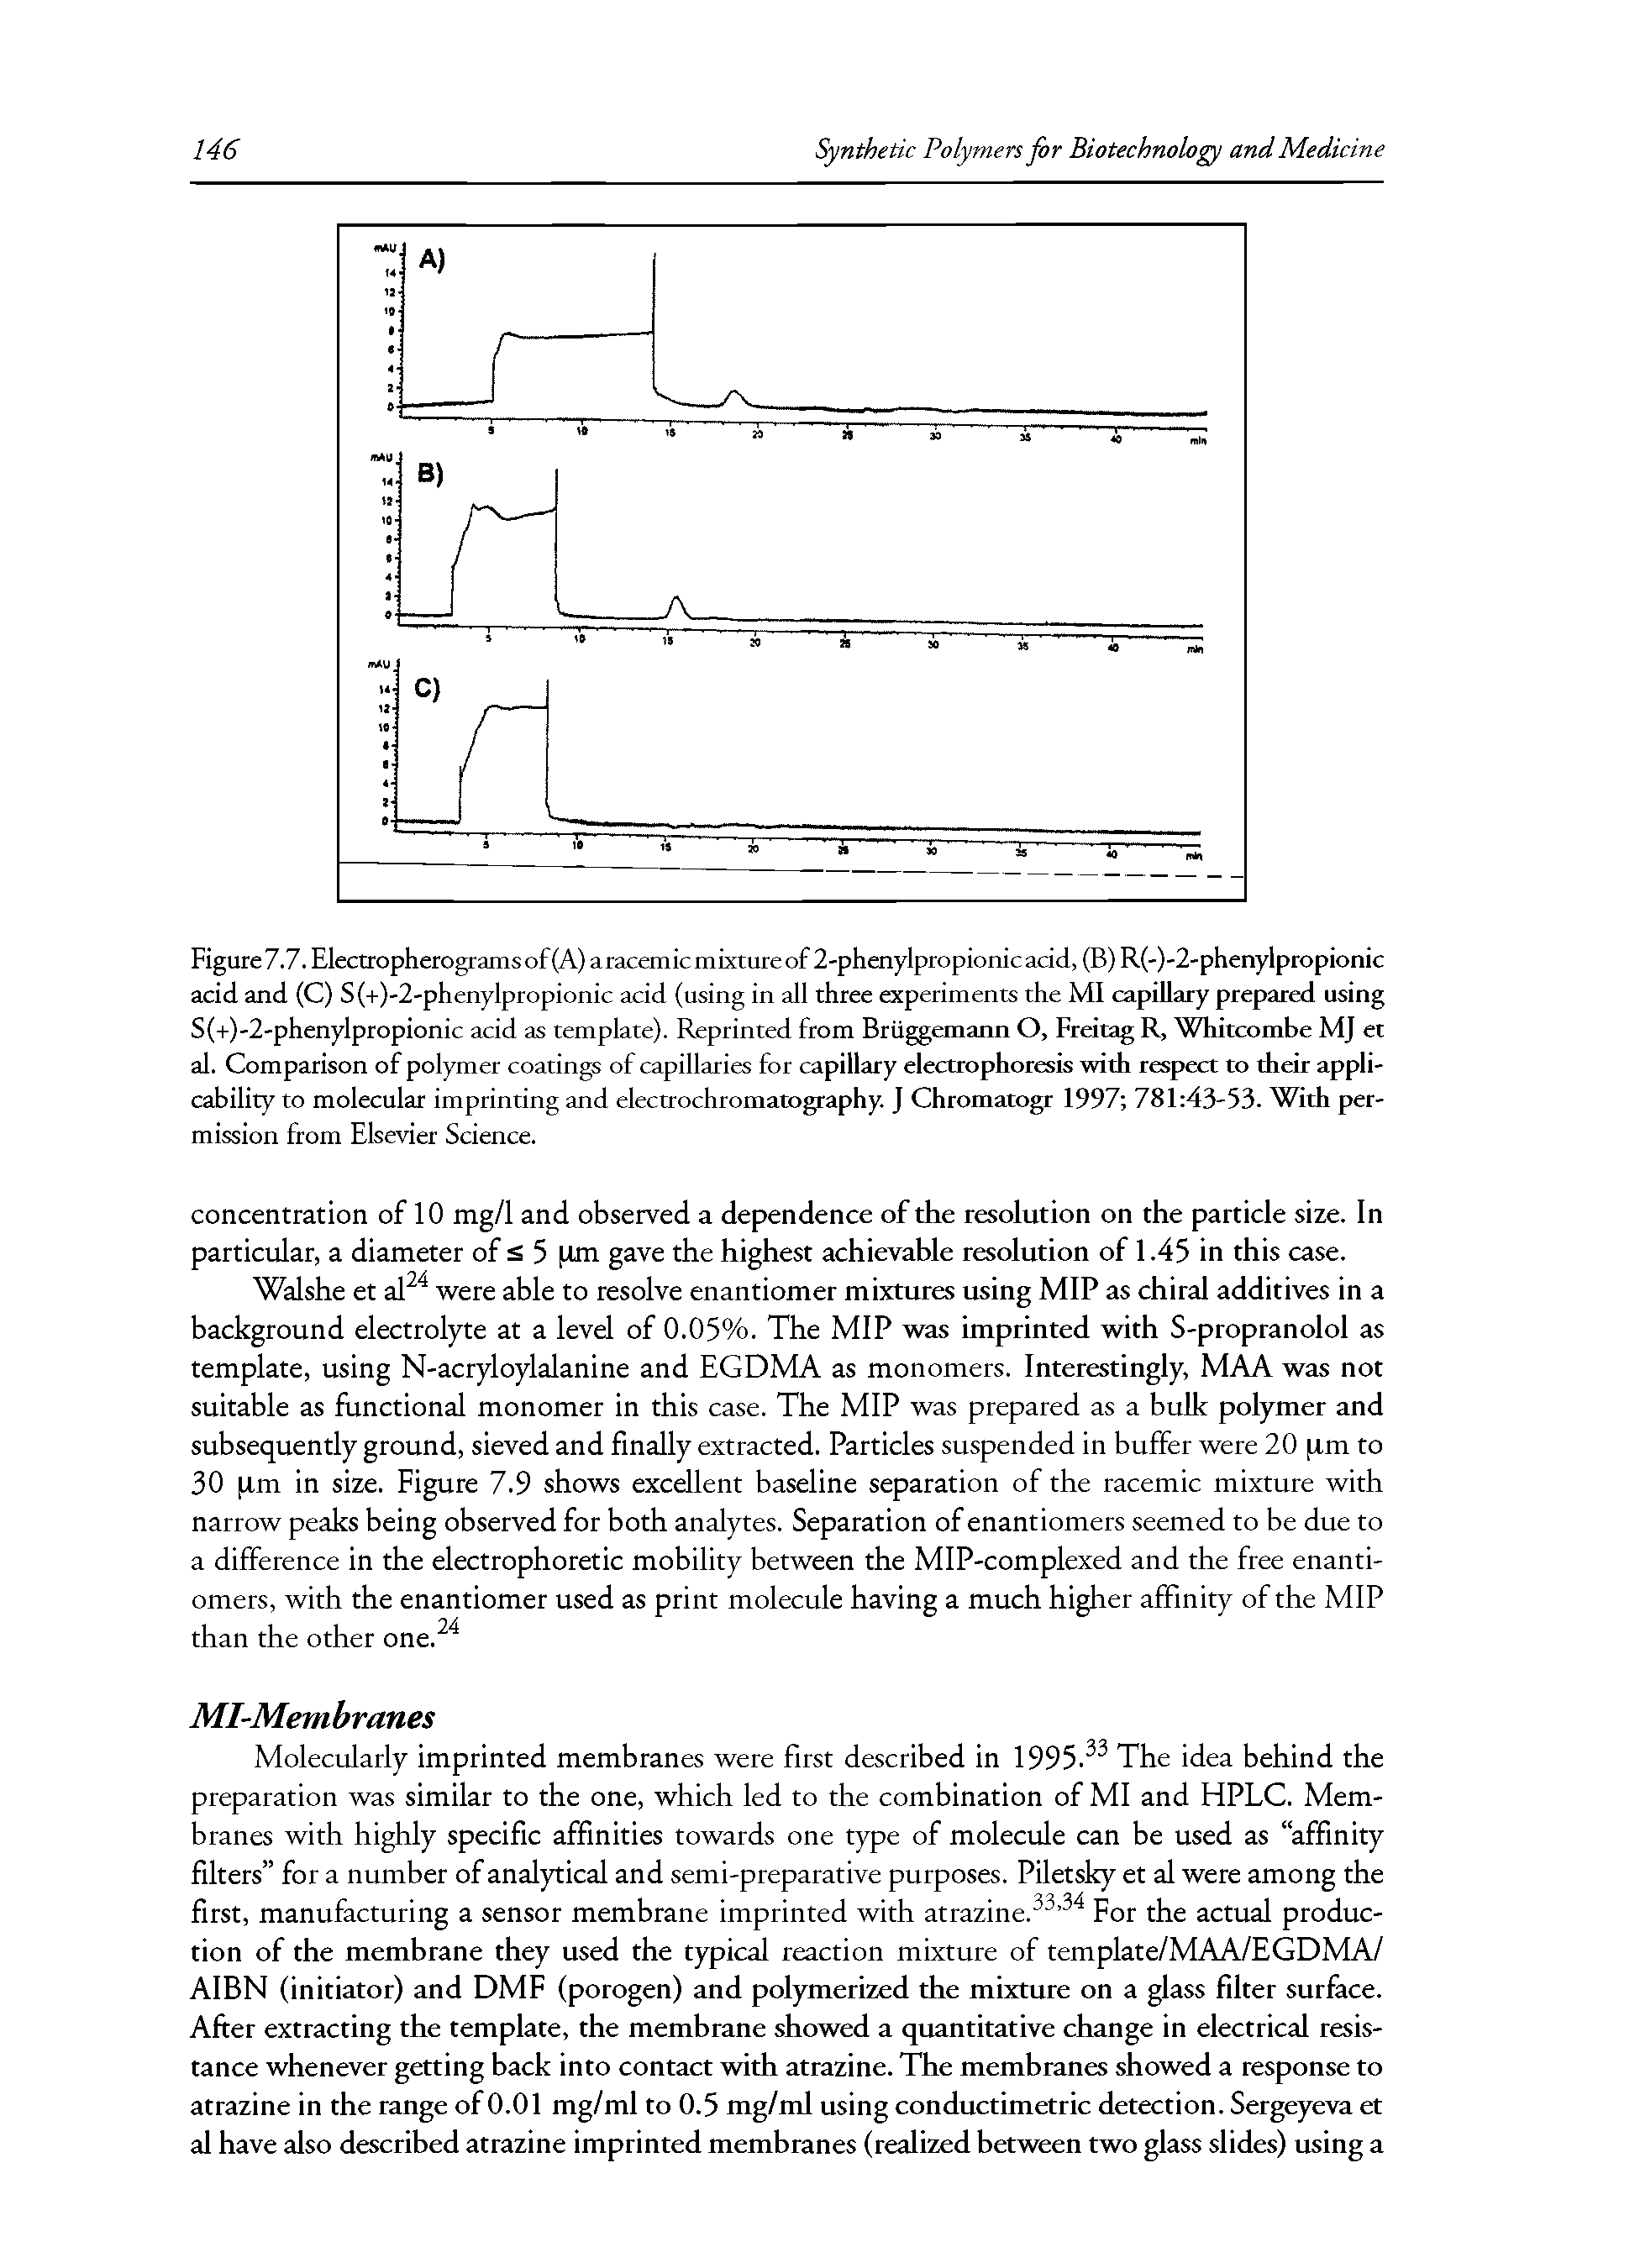 Figure 7.7. Electropherogramsof(A) aracemicmixtureof 2-phenylpropionicacid, (B) R(-)-2-phenylpropionic acid and (C) S(+)-2-phenylpropionic acid (using in all three experiments the MI capillary prepared using S(+)-2-phenylpropionic acid as template). Reprinted from Btii emann O, Freitag R, Whitcombe MJ et al. Comparison of polymer coatings of capillaries for capillary electrophoresis with respect to their applicability to molecular imprinting and electrochromamgraphy. J Chromatogr 1997 781 43-53. With permission from Elsevier Science.